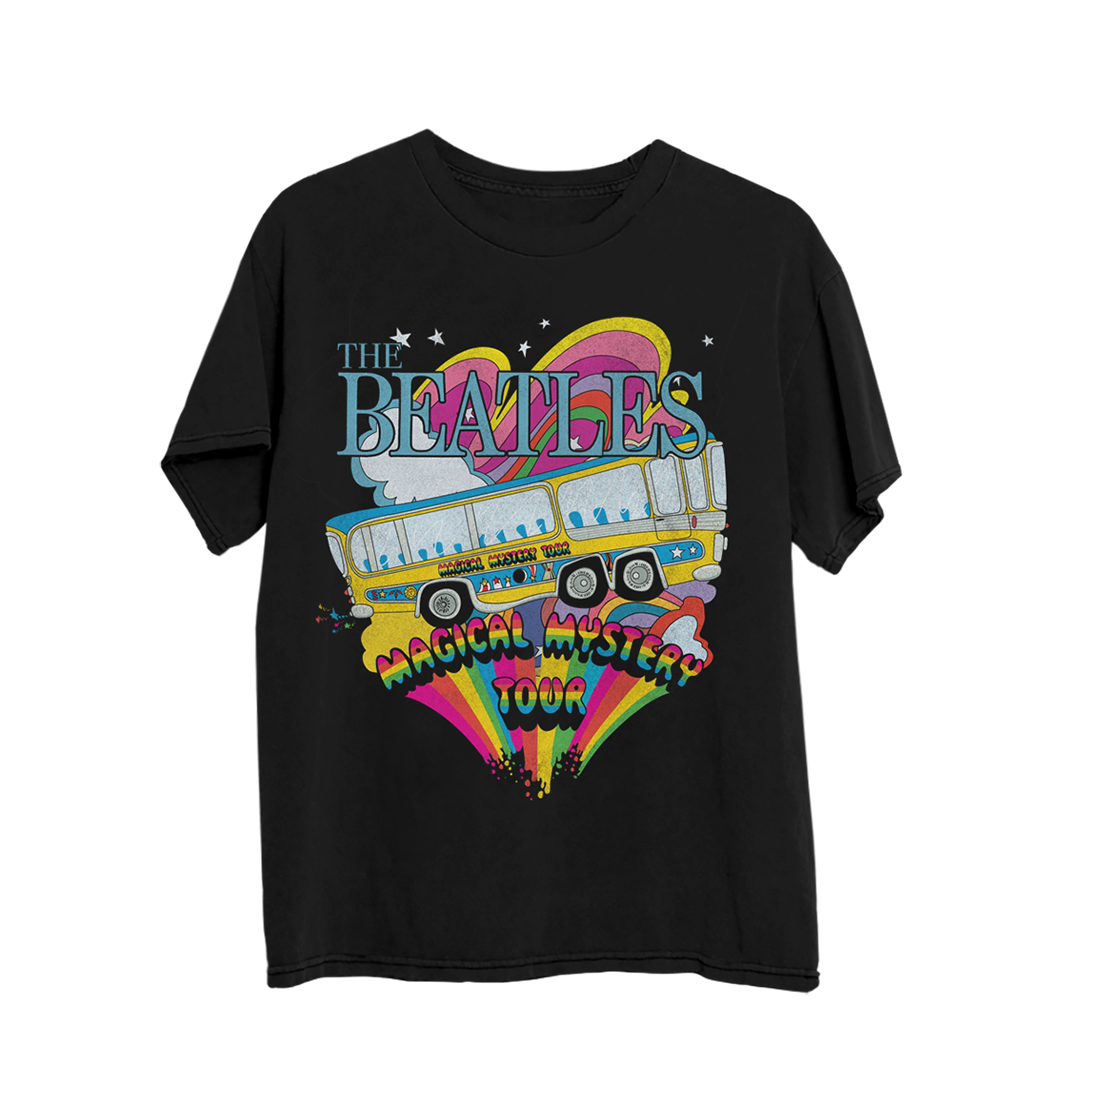 The Beatles - Magical Mystery Tour Black T-Shirt